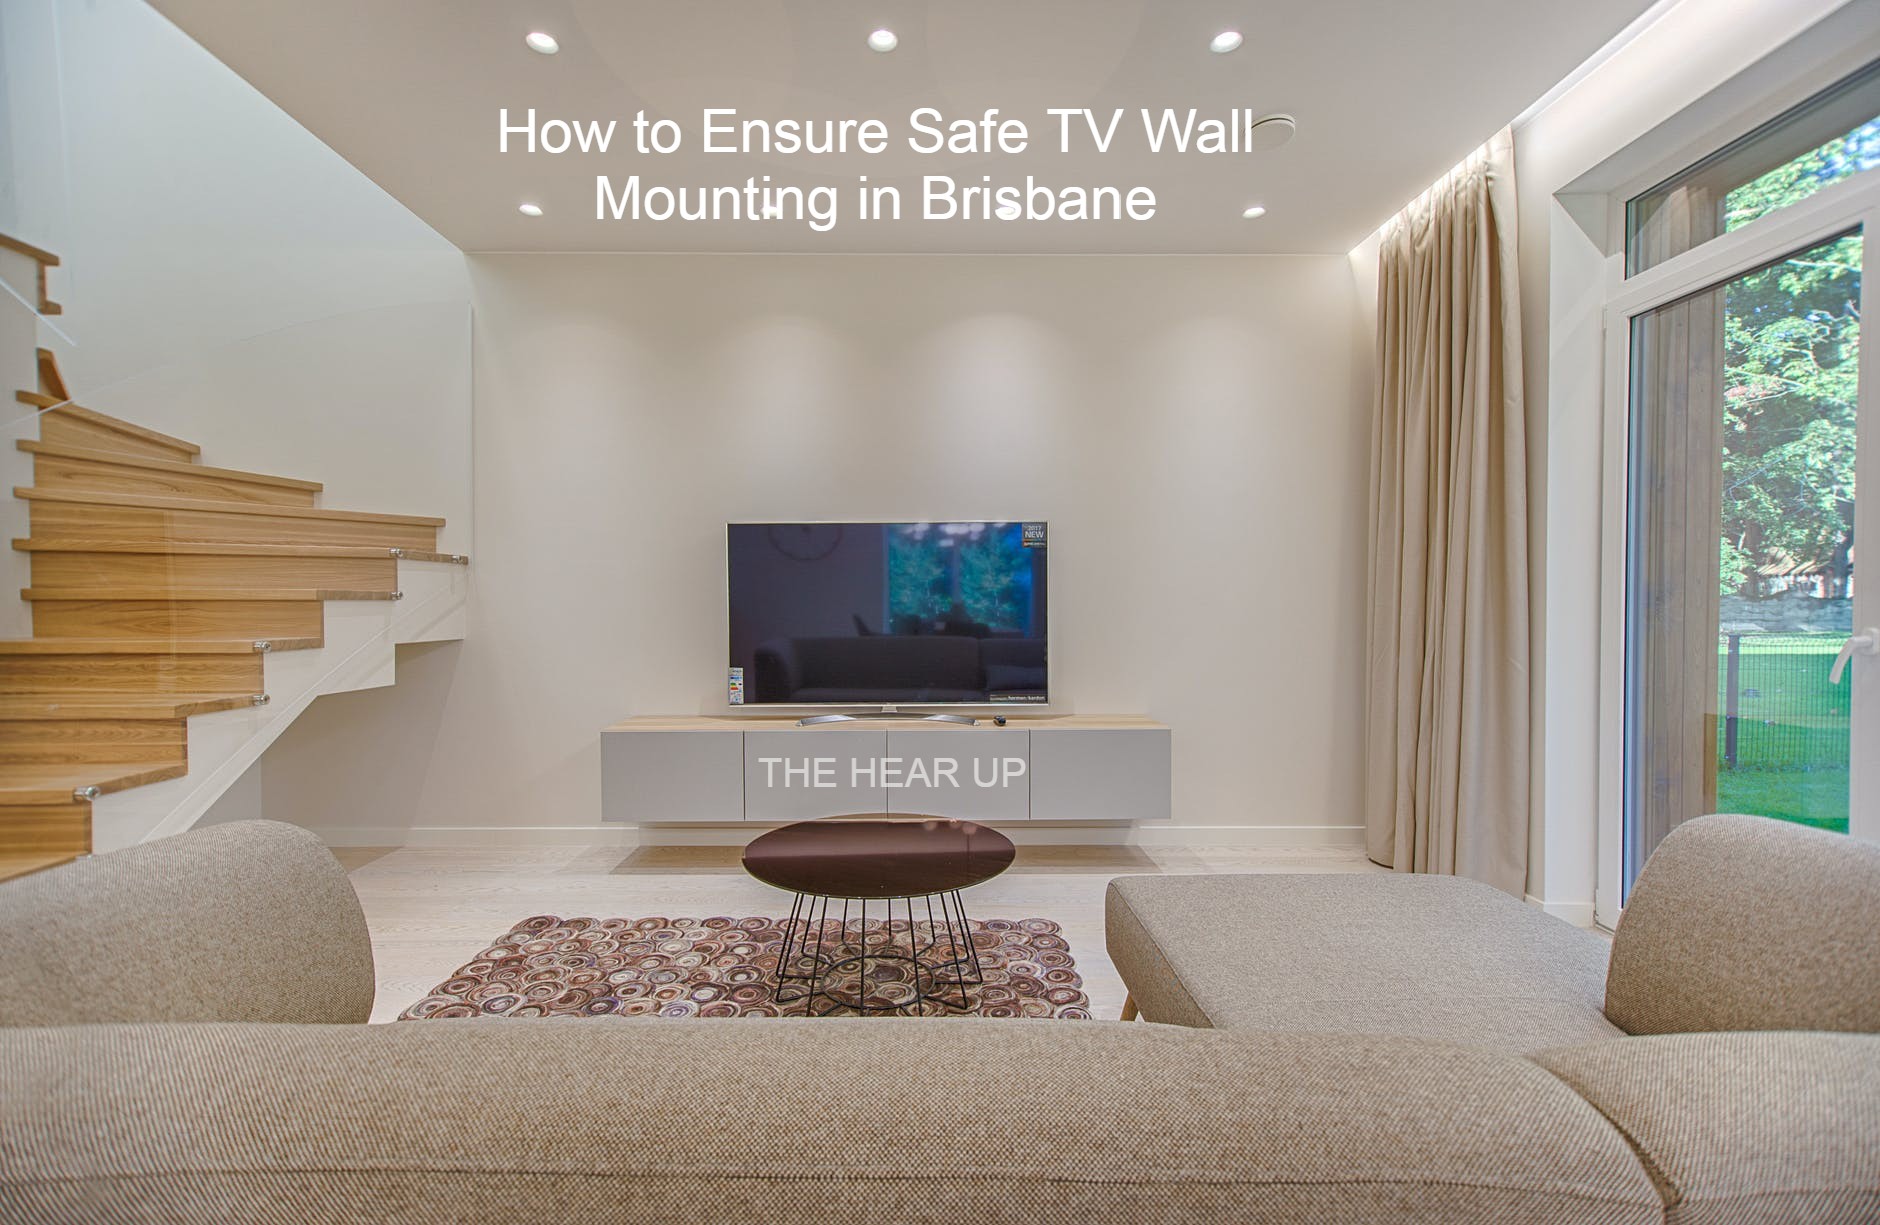 How to Ensure Safe TV Wall Mounting in Brisbane